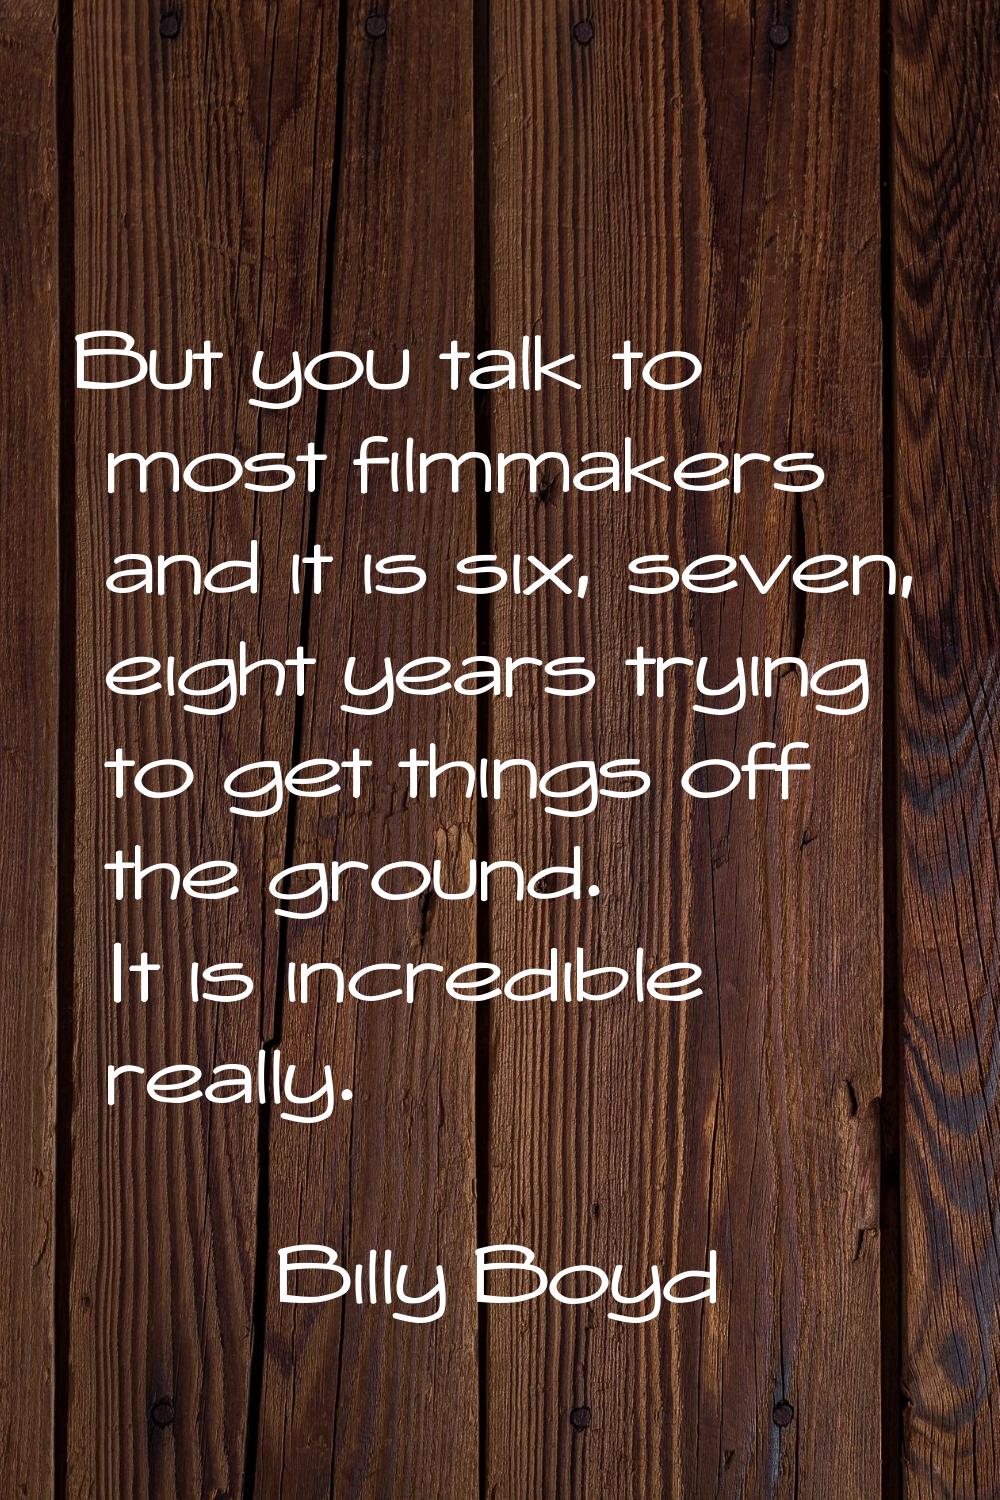 But you talk to most filmmakers and it is six, seven, eight years trying to get things off the grou